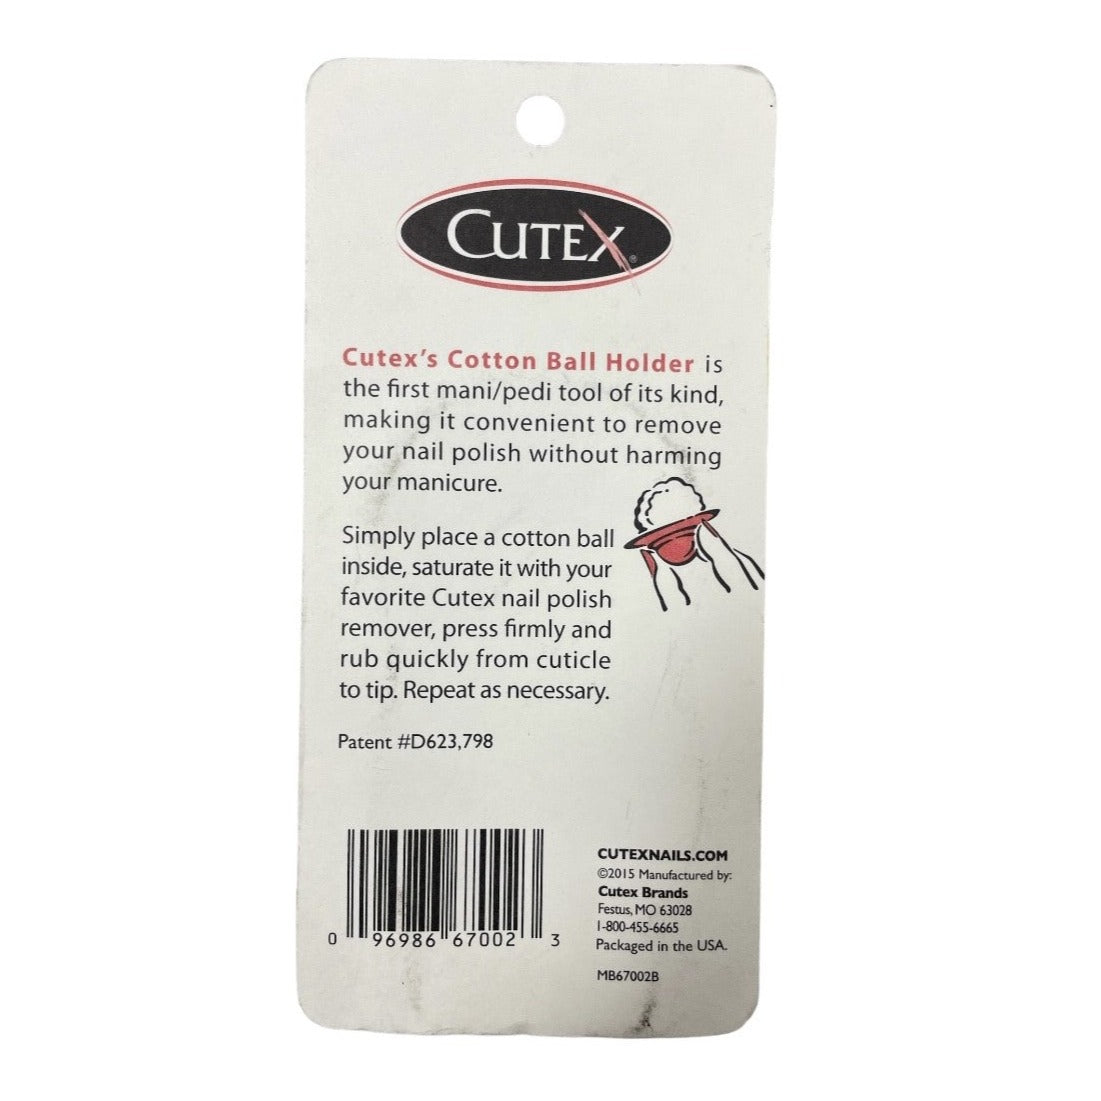 Cutex Cotton Ball Holder, 2 Count manicure pedicure tools